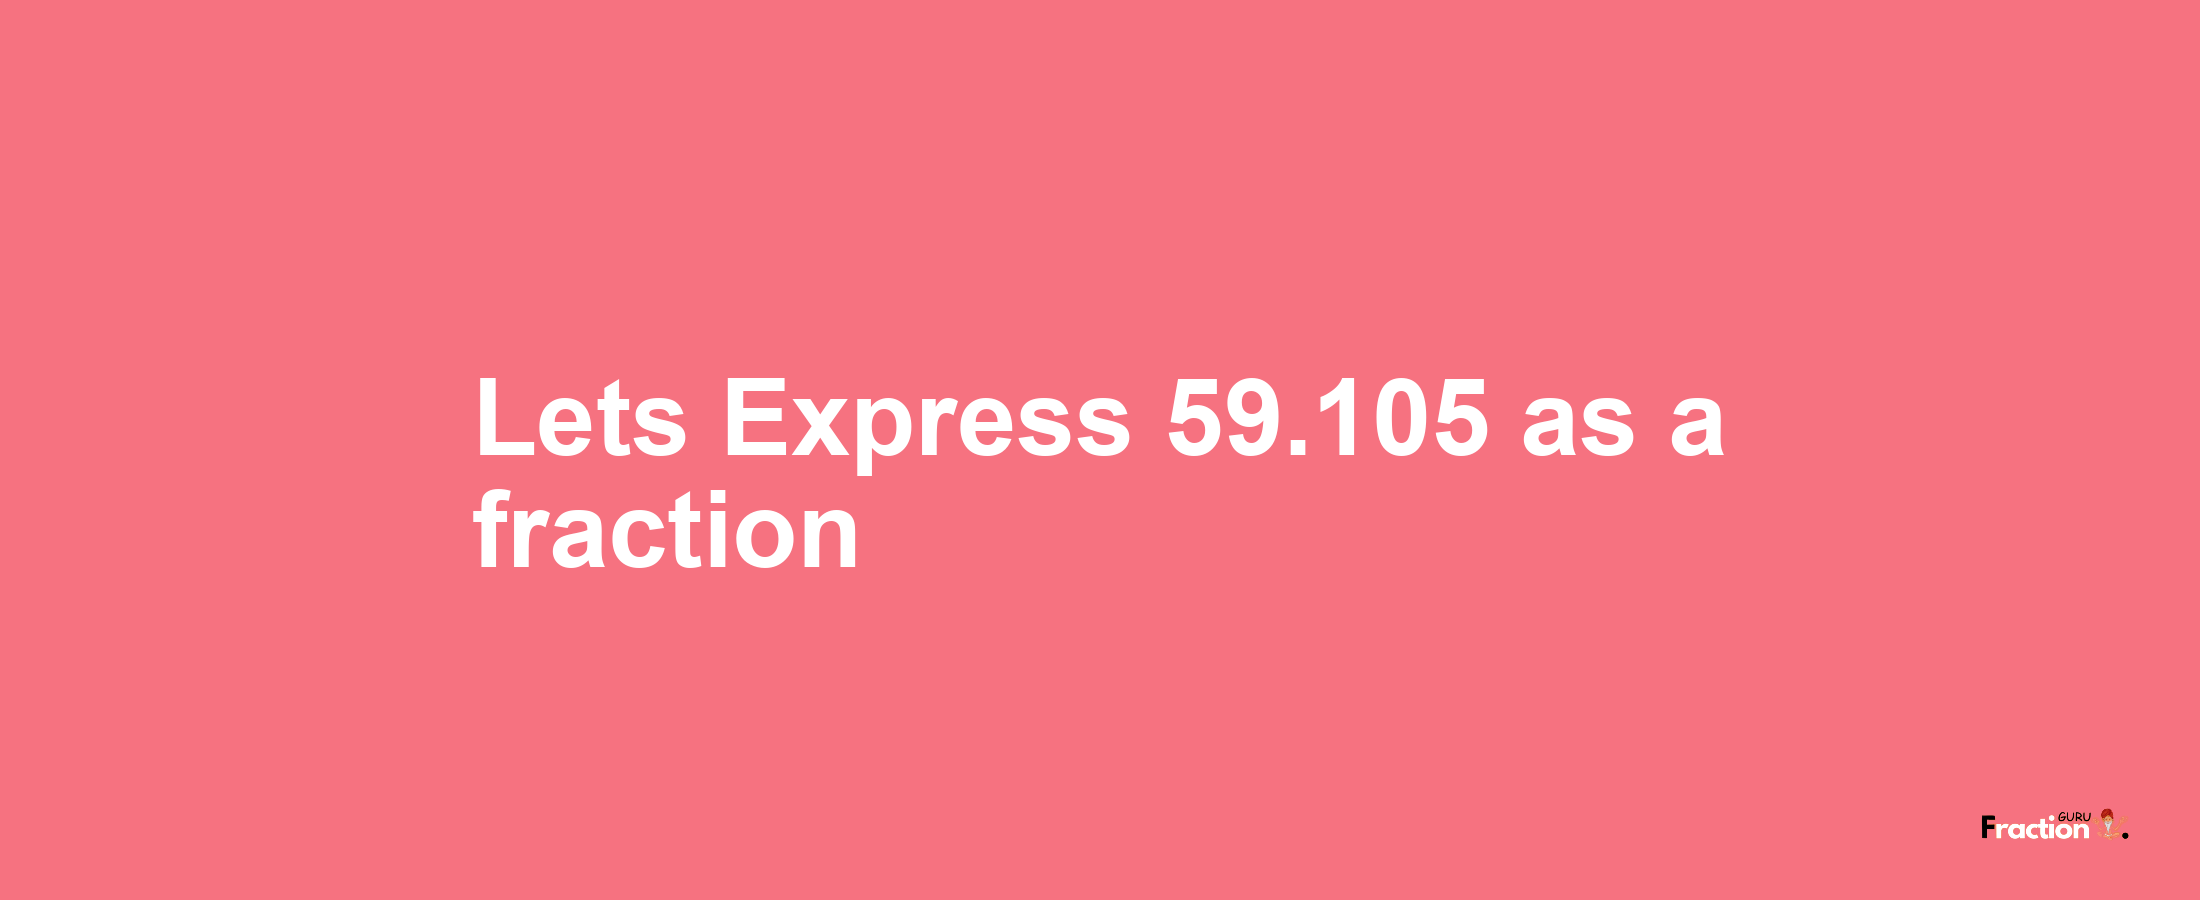 Lets Express 59.105 as afraction